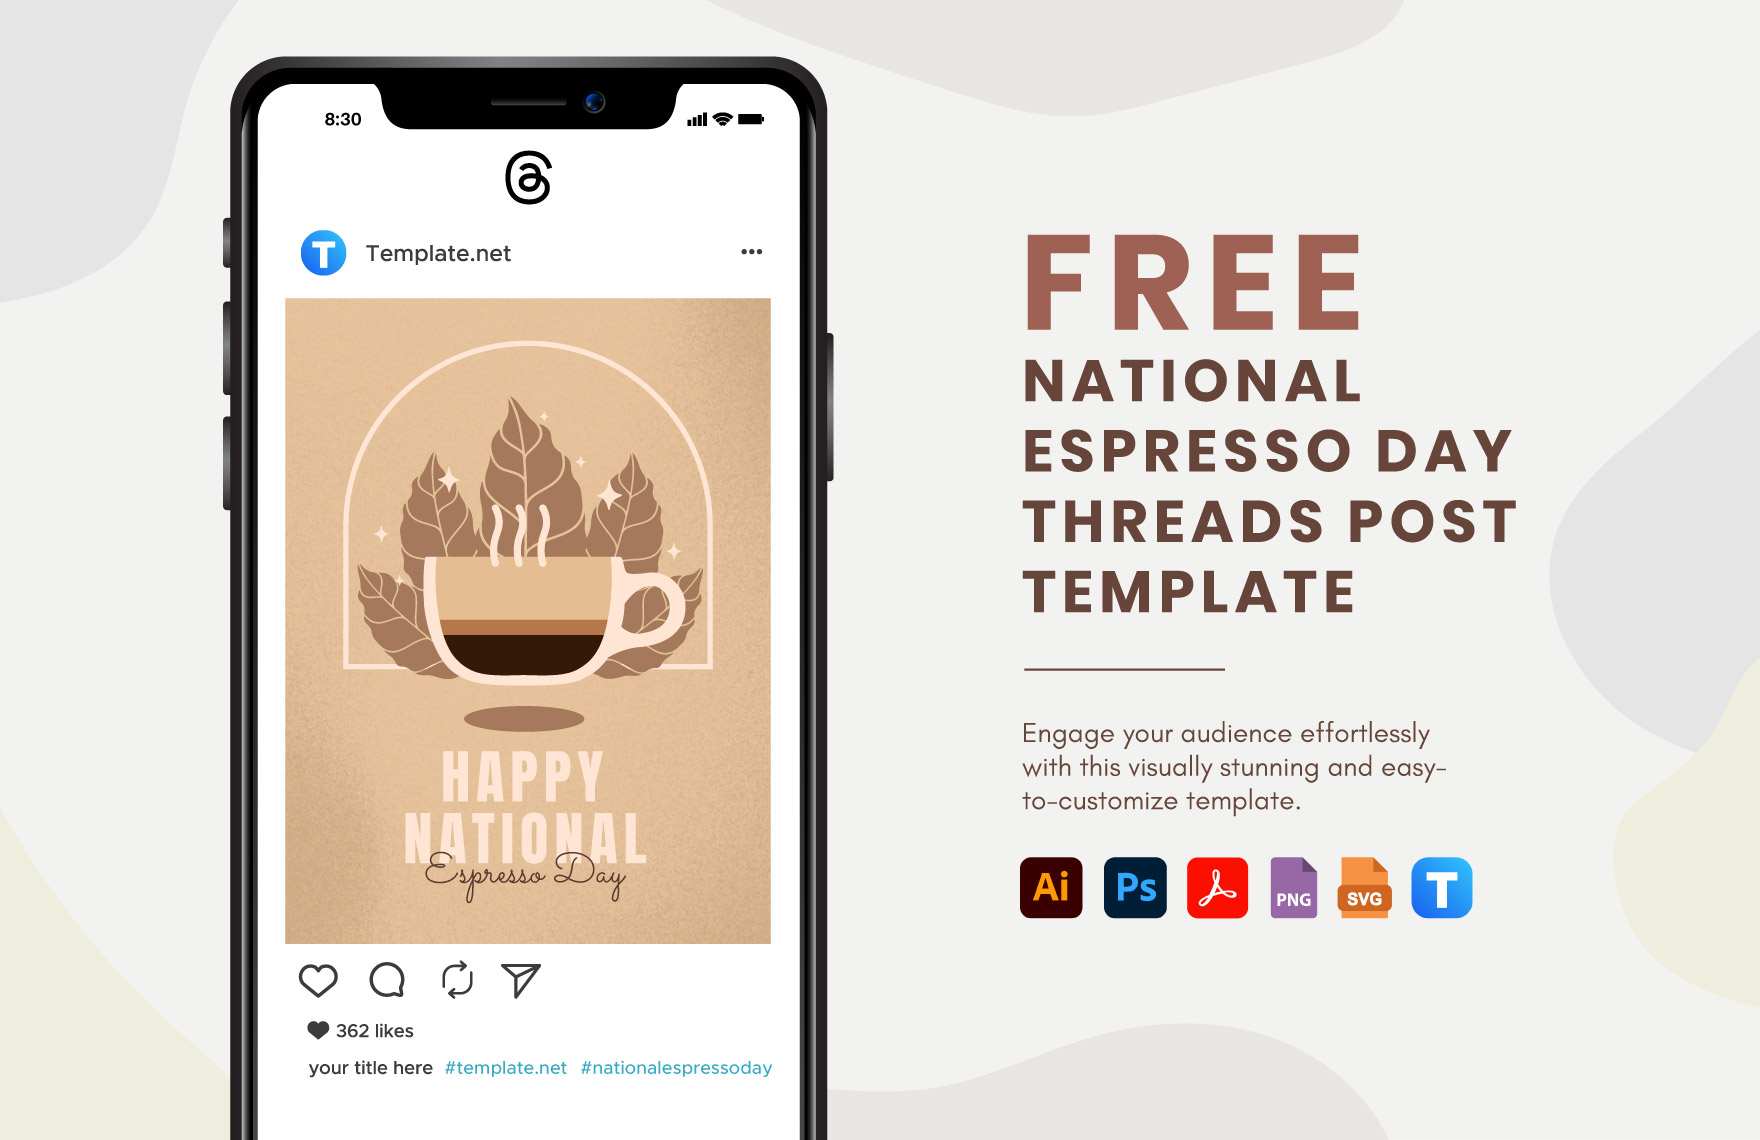 Free National Espresso Day Threads Post Template in PDF, Illustrator, PSD, SVG, PNG